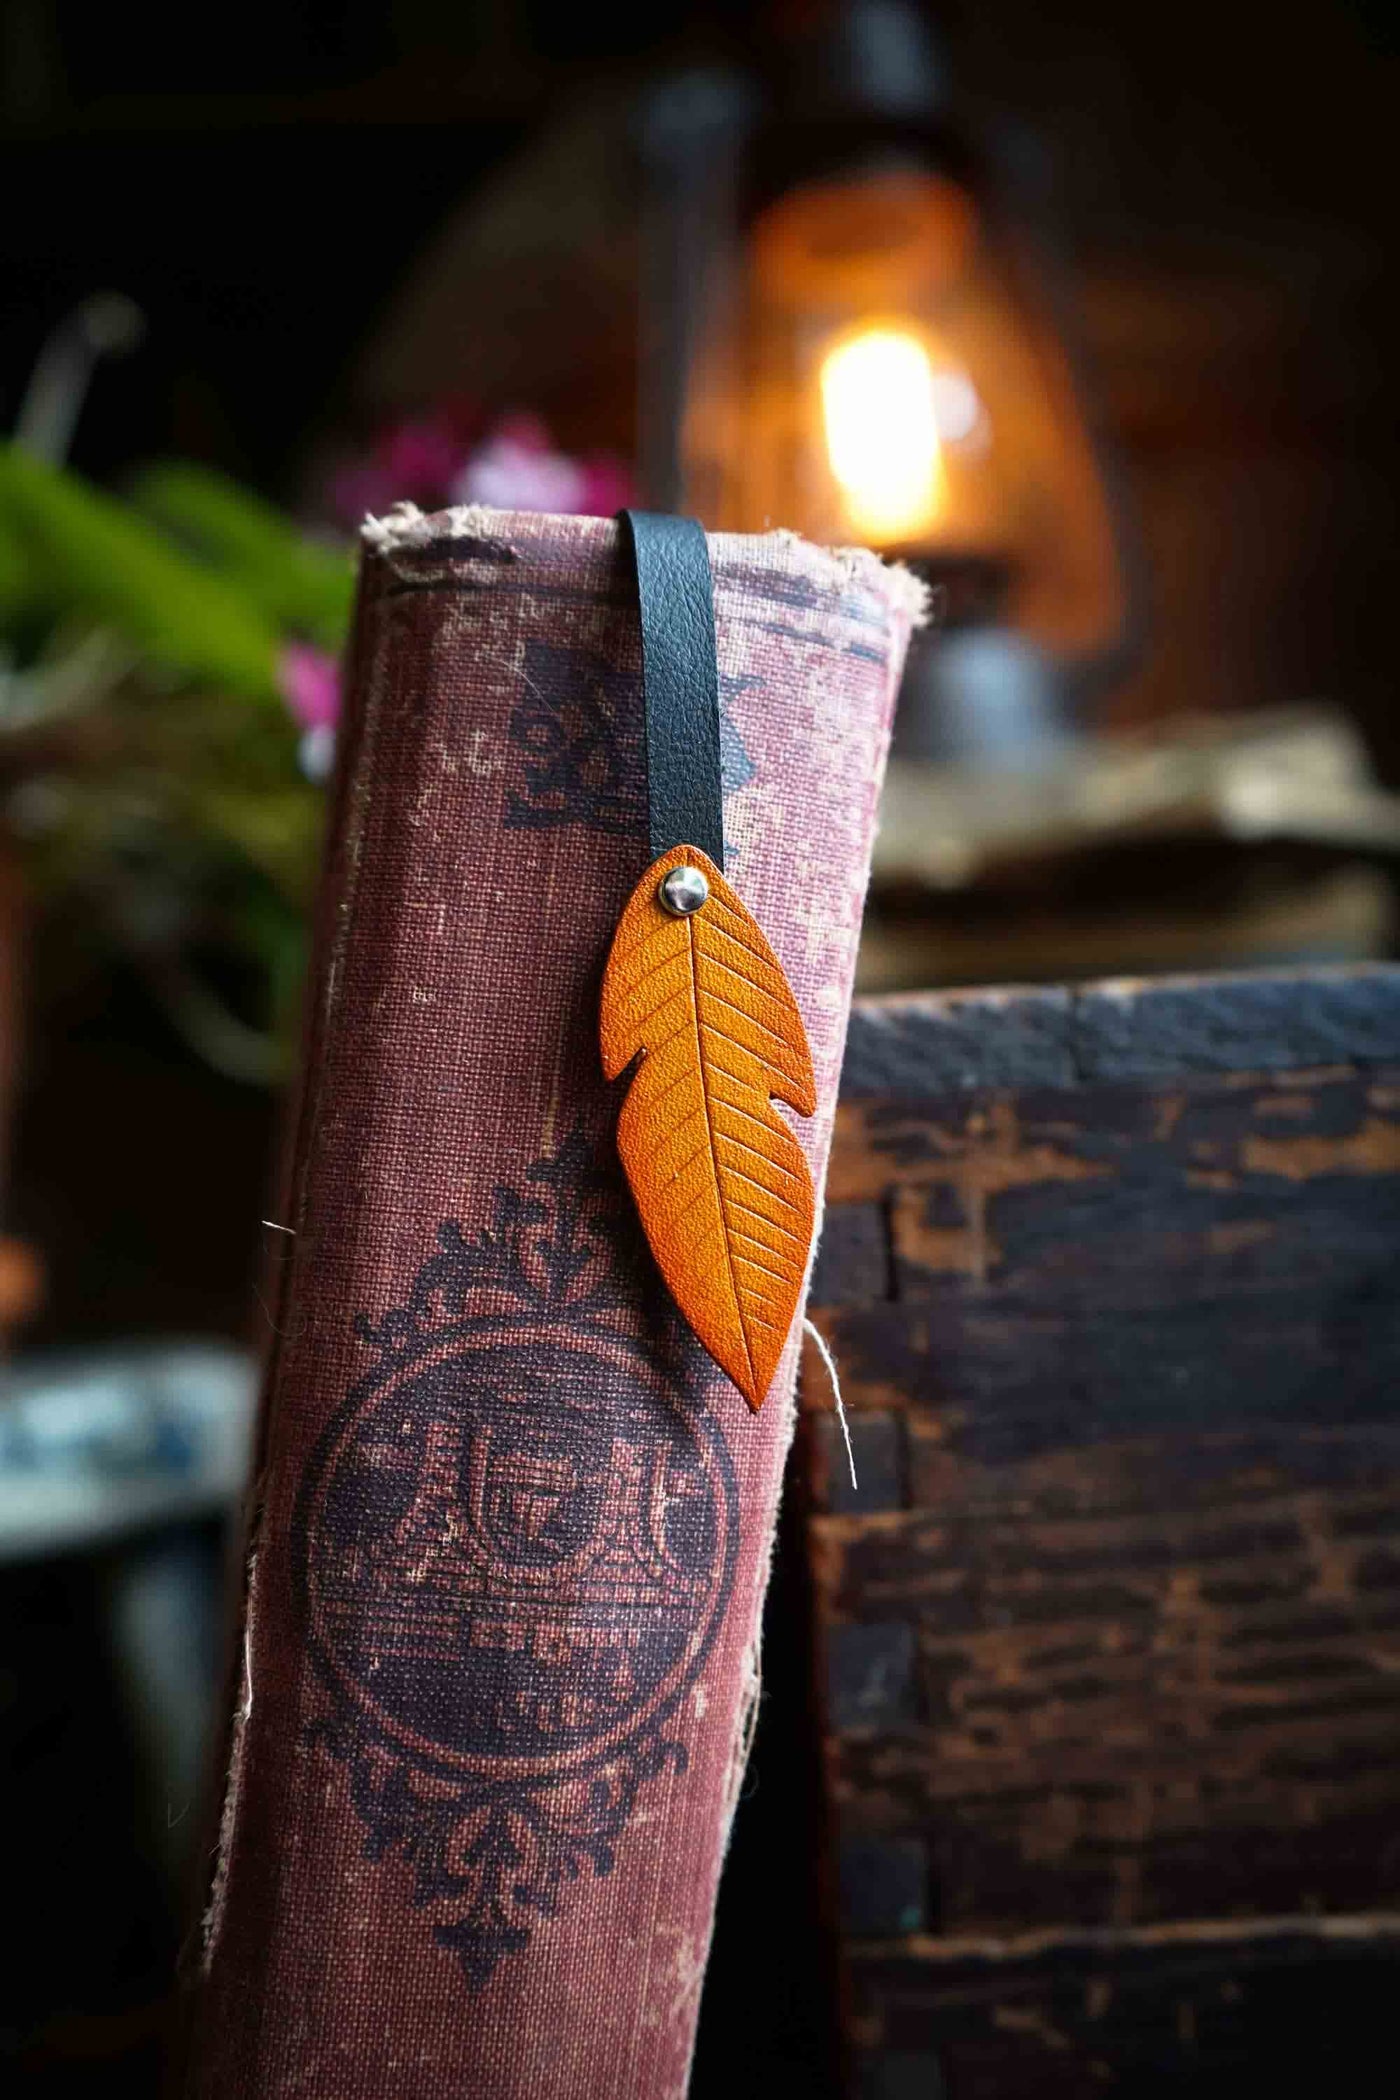 Feather Bookmark - Large Edition